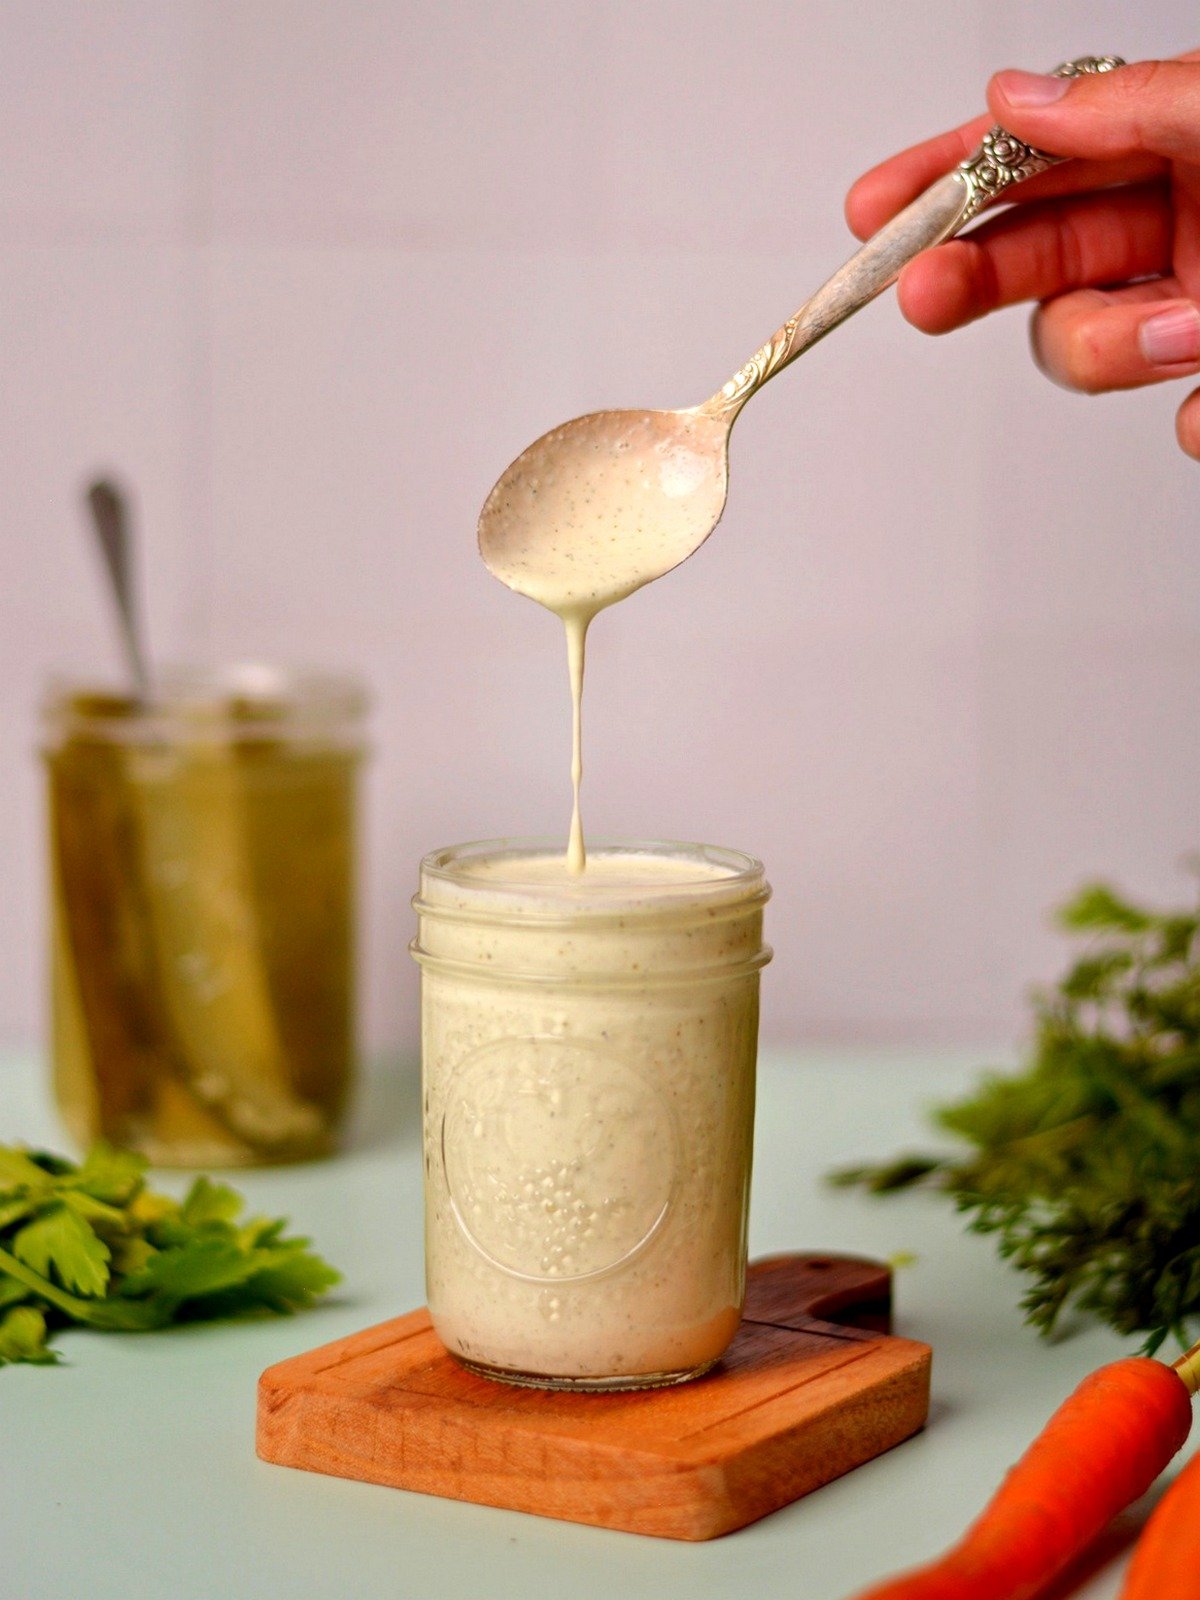 Taking a spoonful of dill pickle dressing from a glass jar.